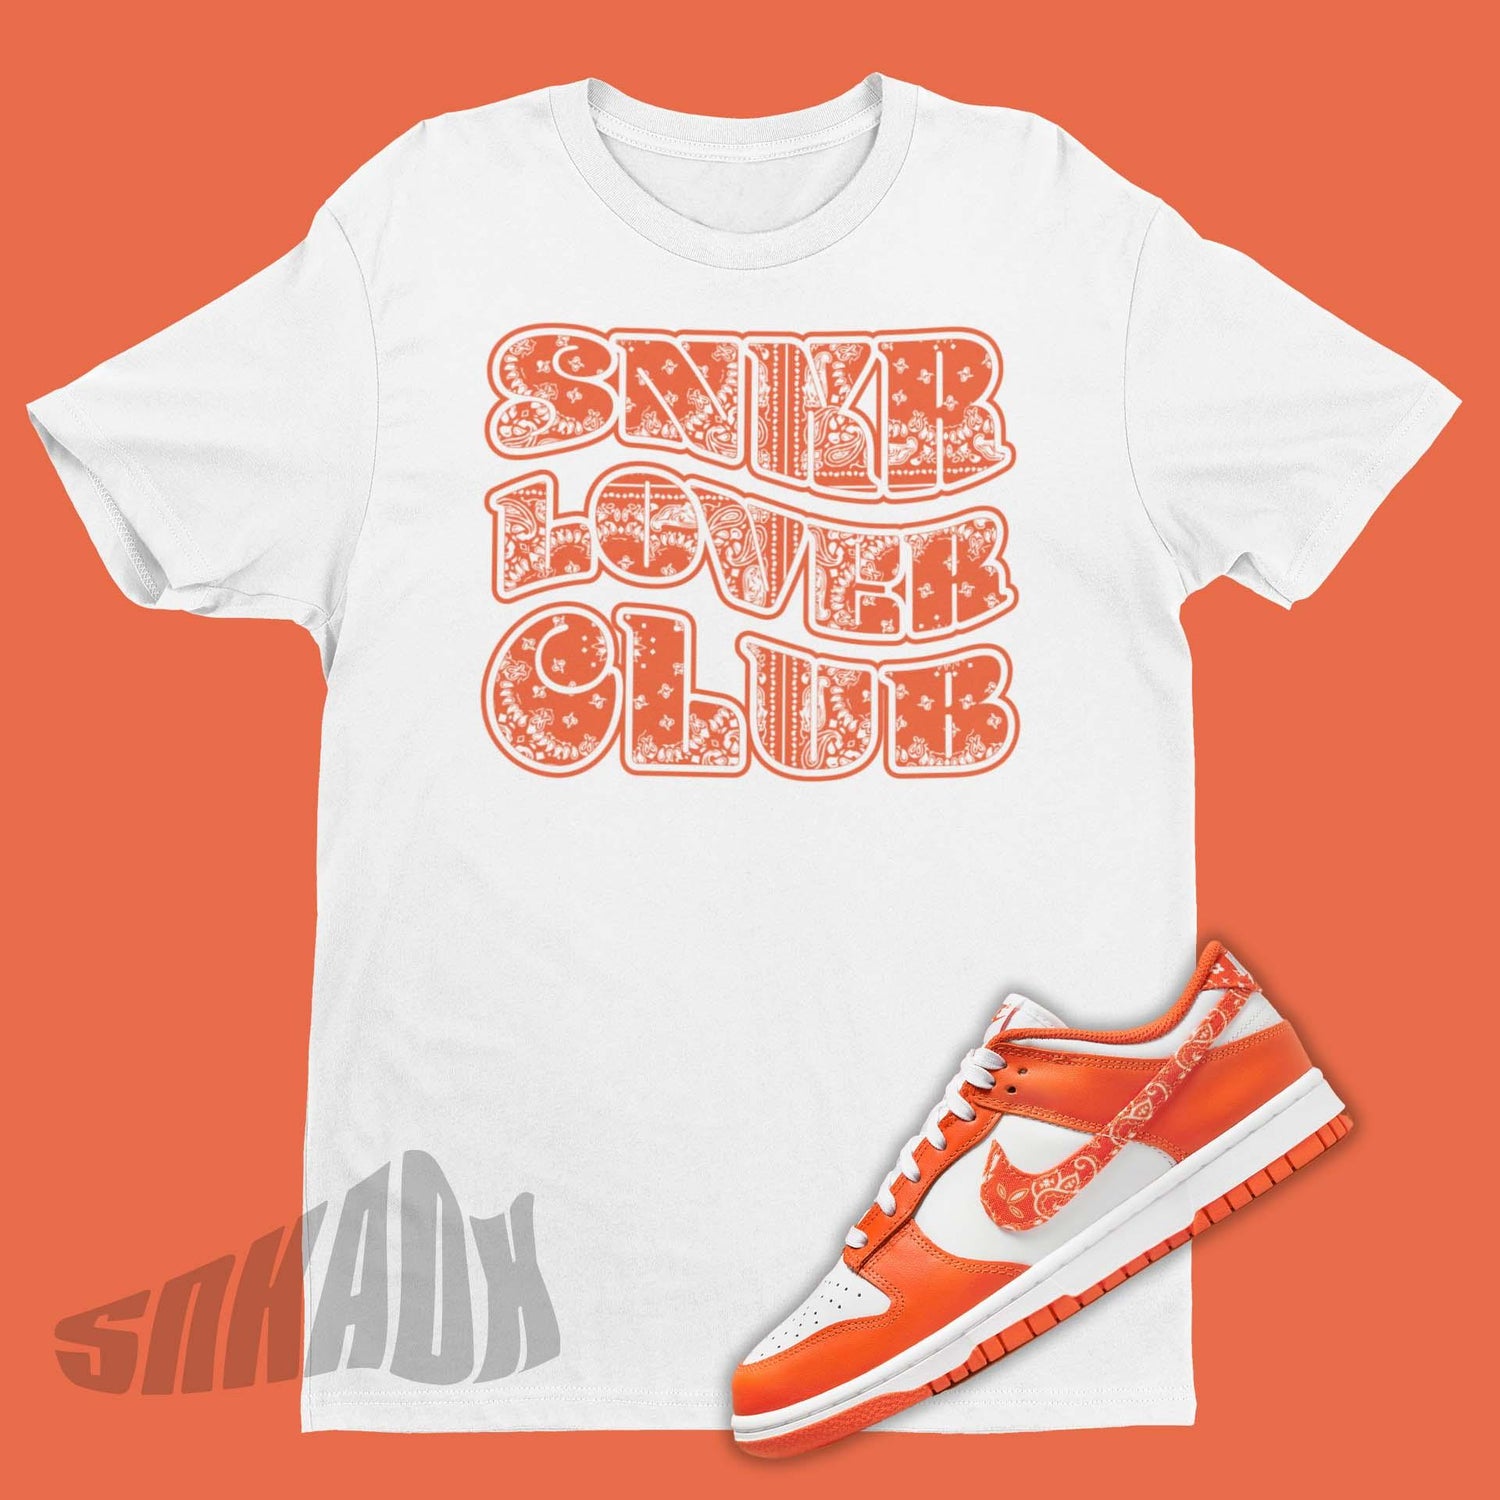 Snkr Lover Club Wavy Font Shirt To Match Nike Dunk Low Essential Paisley